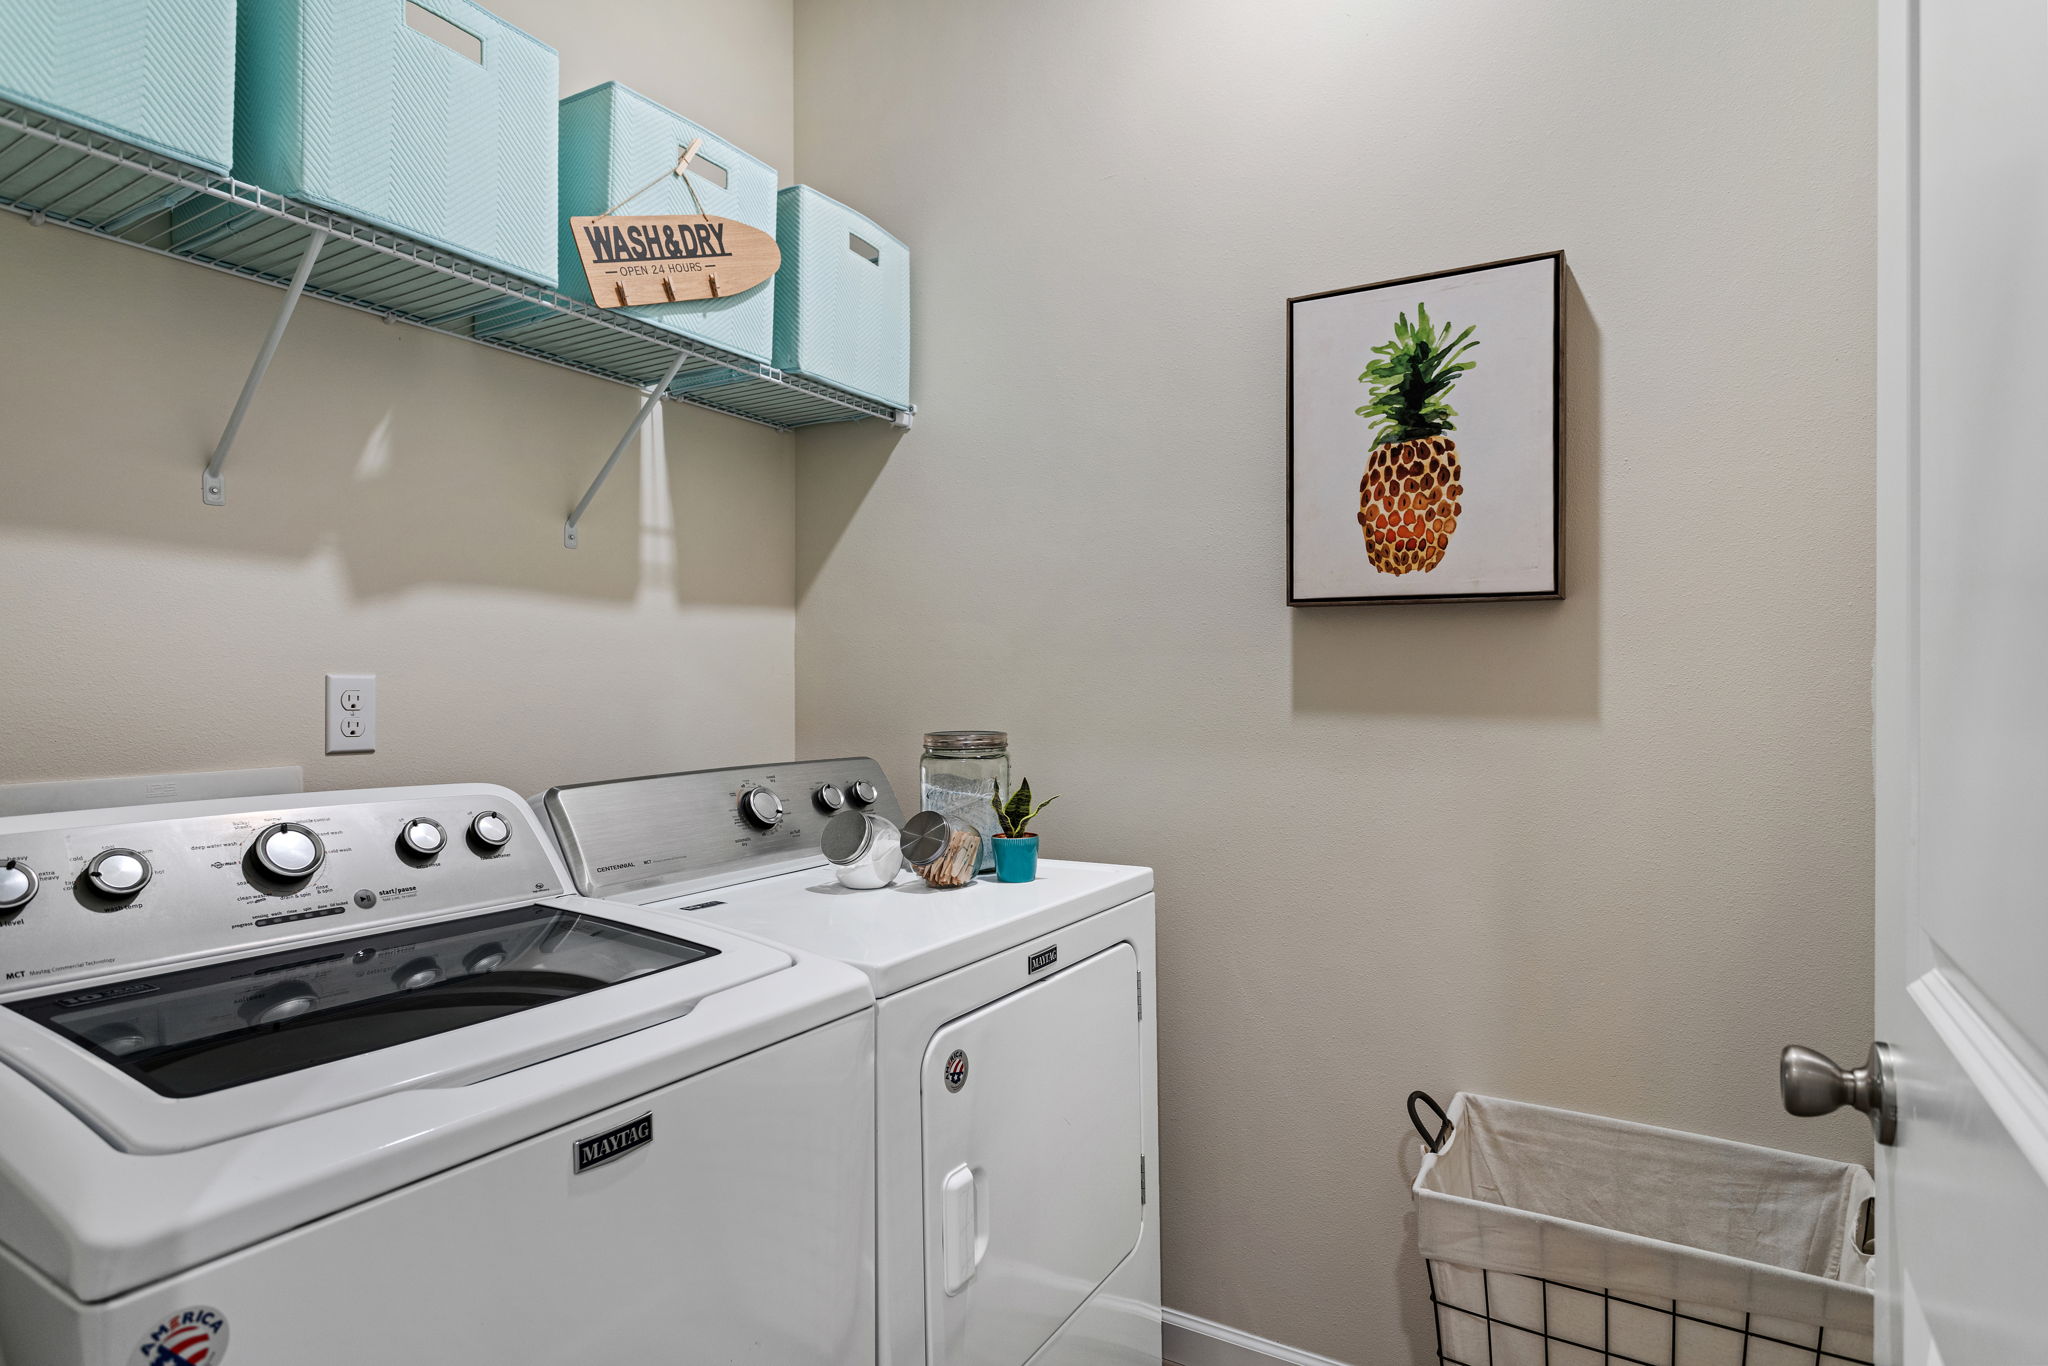 Spacious laundry room and shelving for all your laundry necessities!